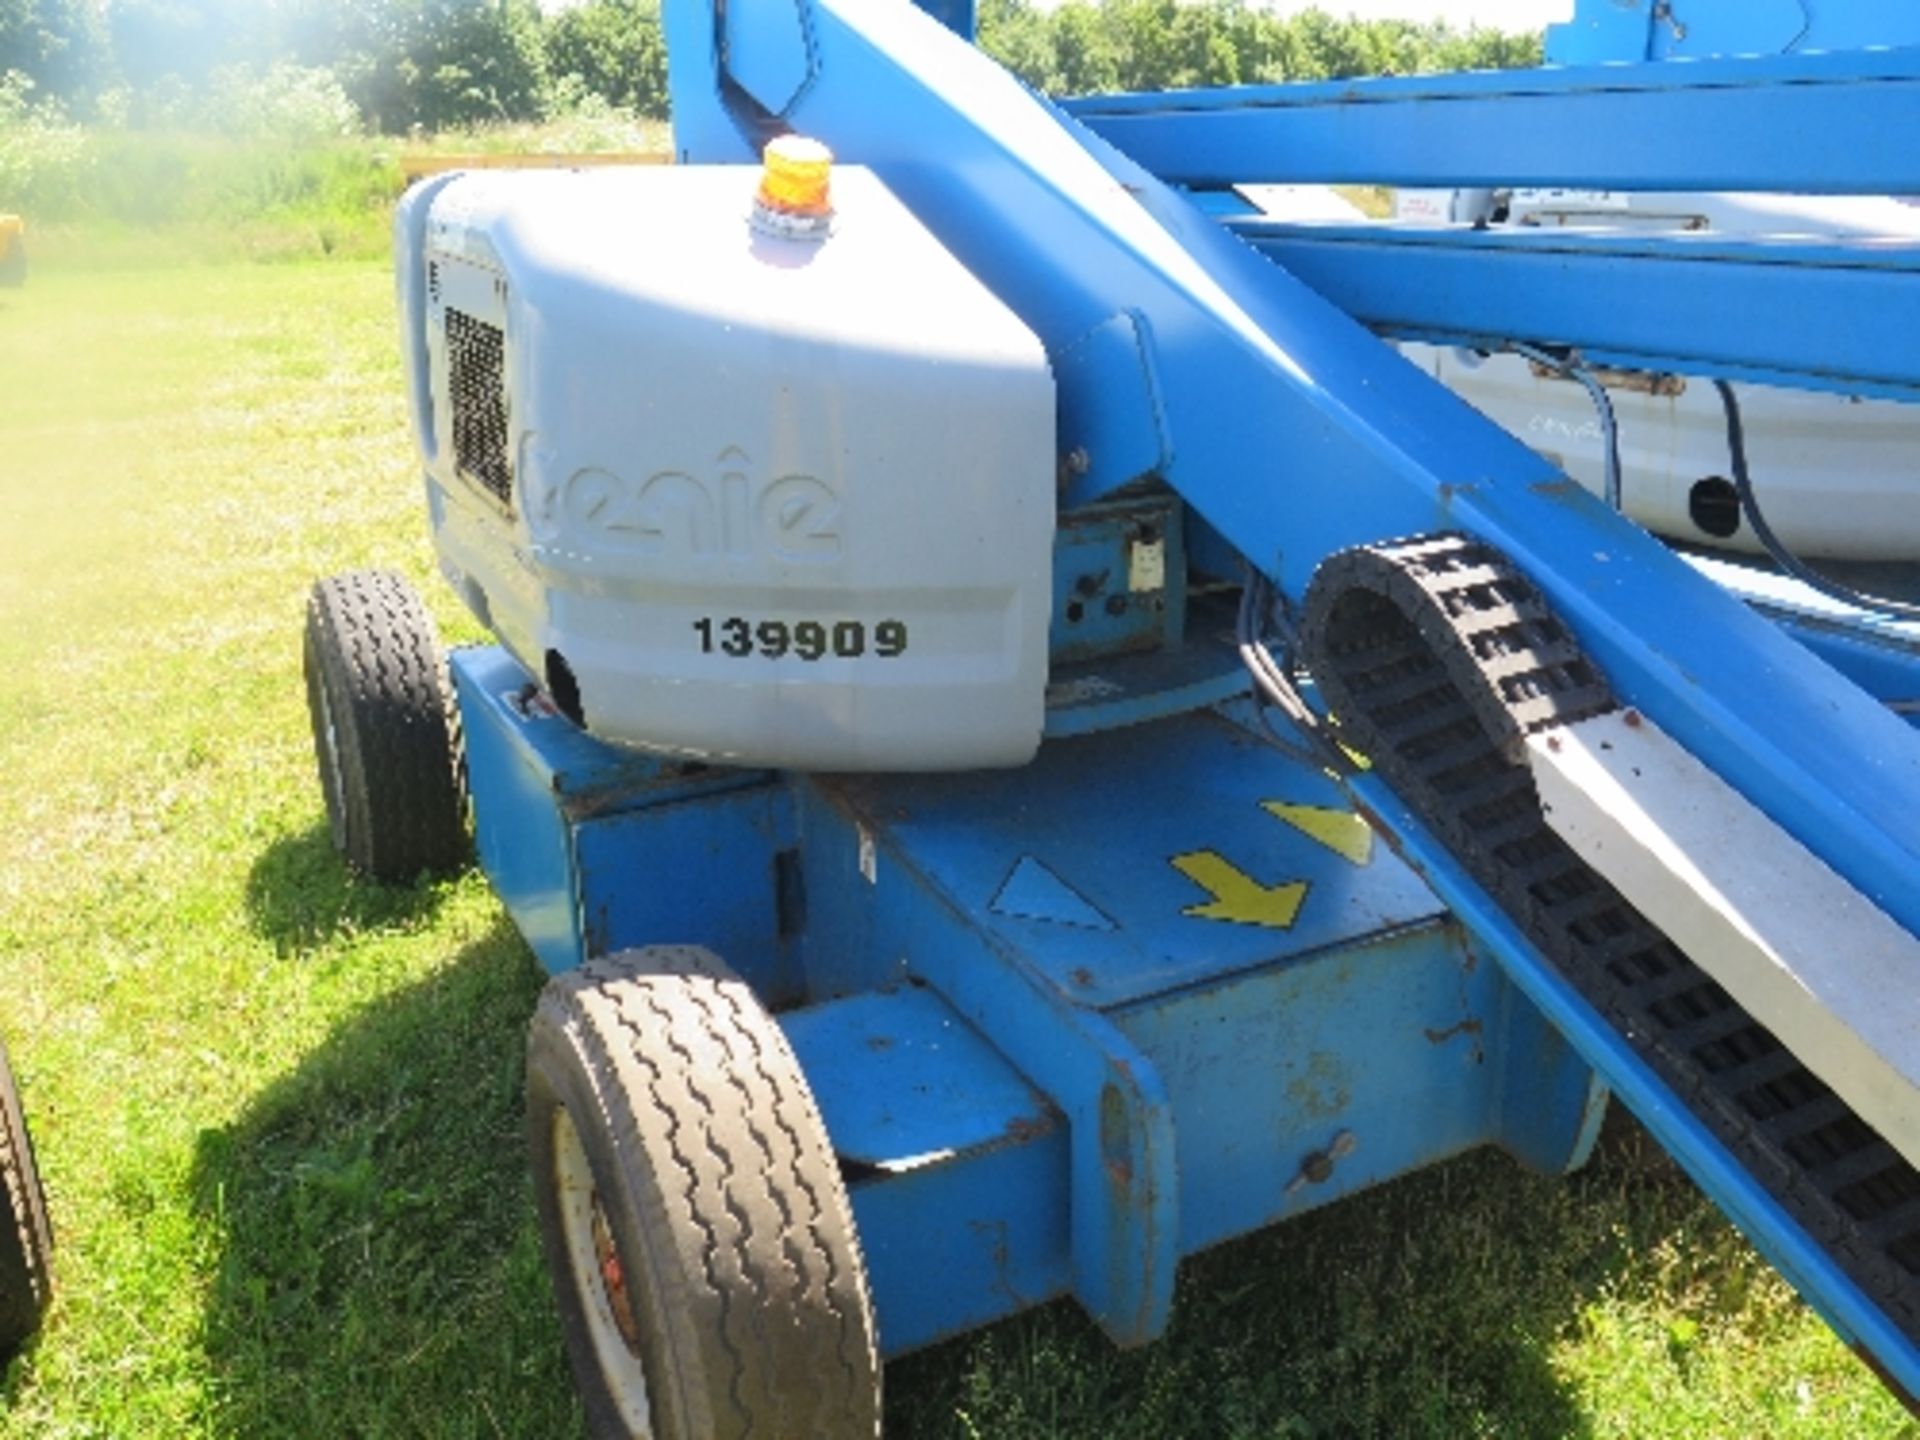 Genie Z45/25 Bi-fuel artic boom boom 898 hrs 2005 139909ALL LOTS are SOLD AS SEEN WITHOUT WARRANTY - Image 3 of 6